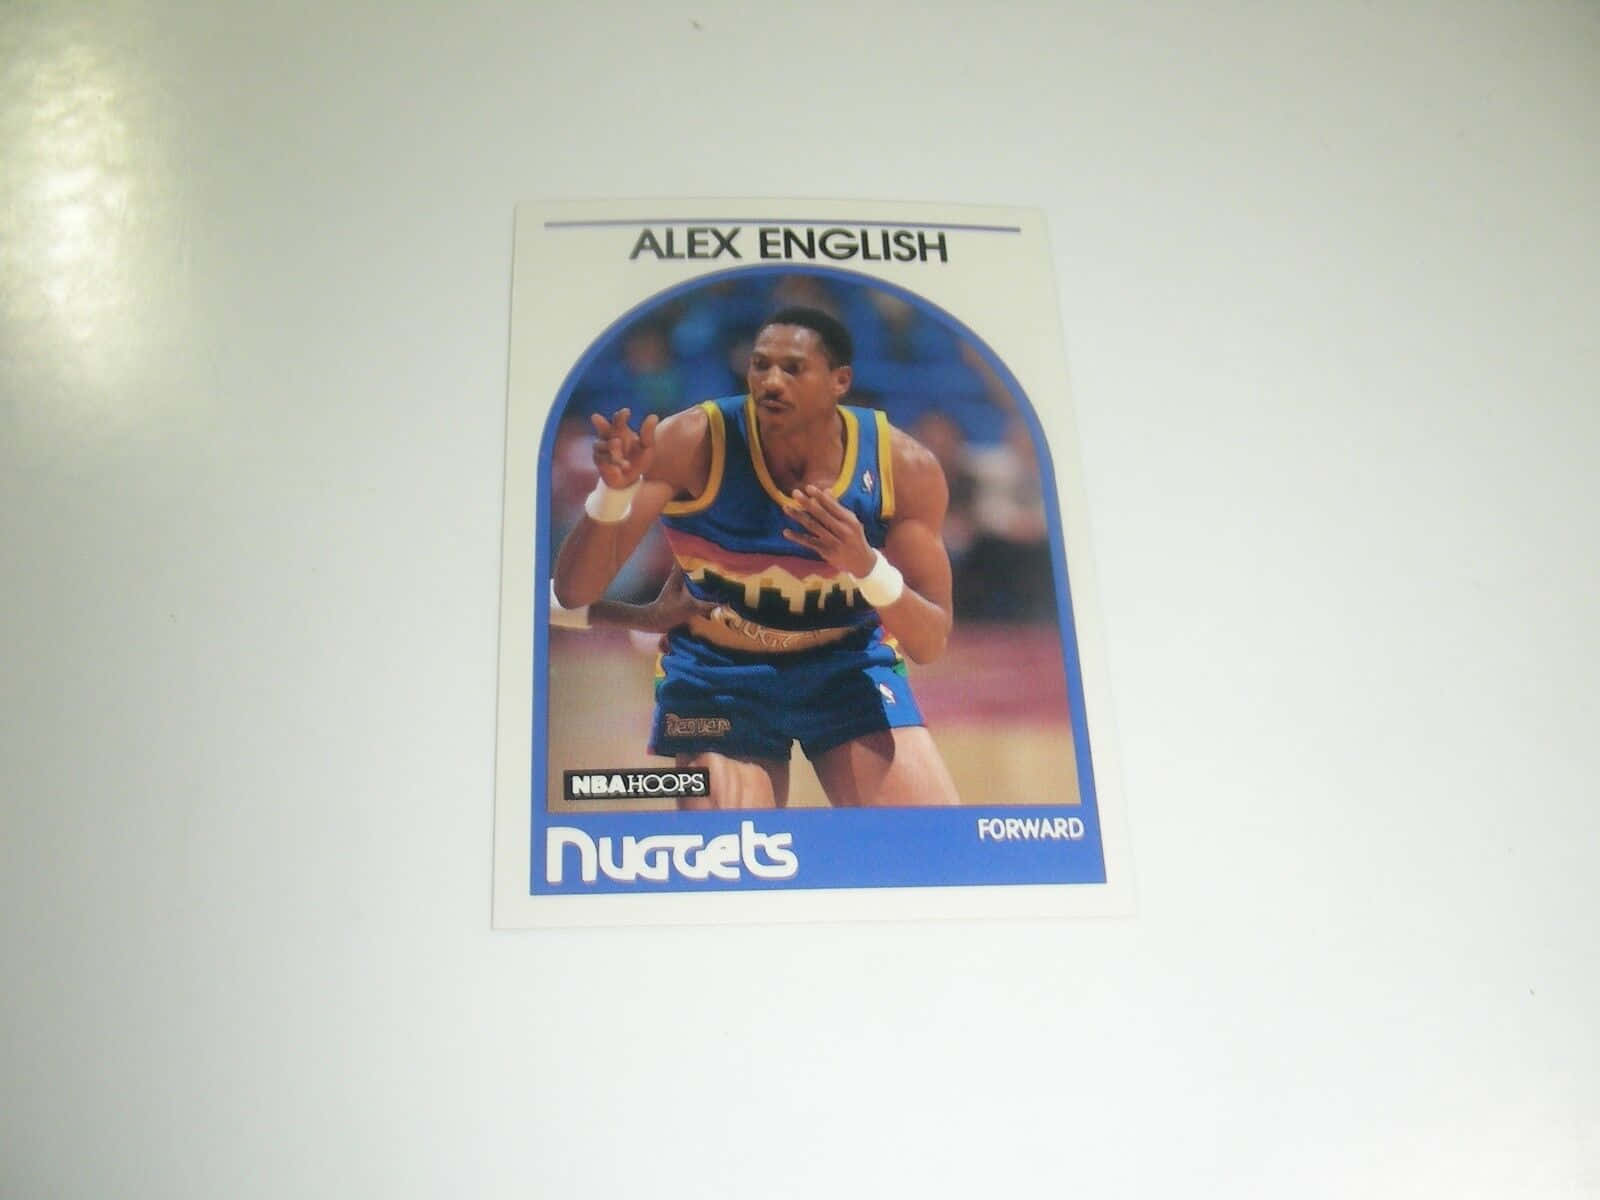 Alexenglish 1989 Nba Hoops Basketball Card Would Be Translated To 